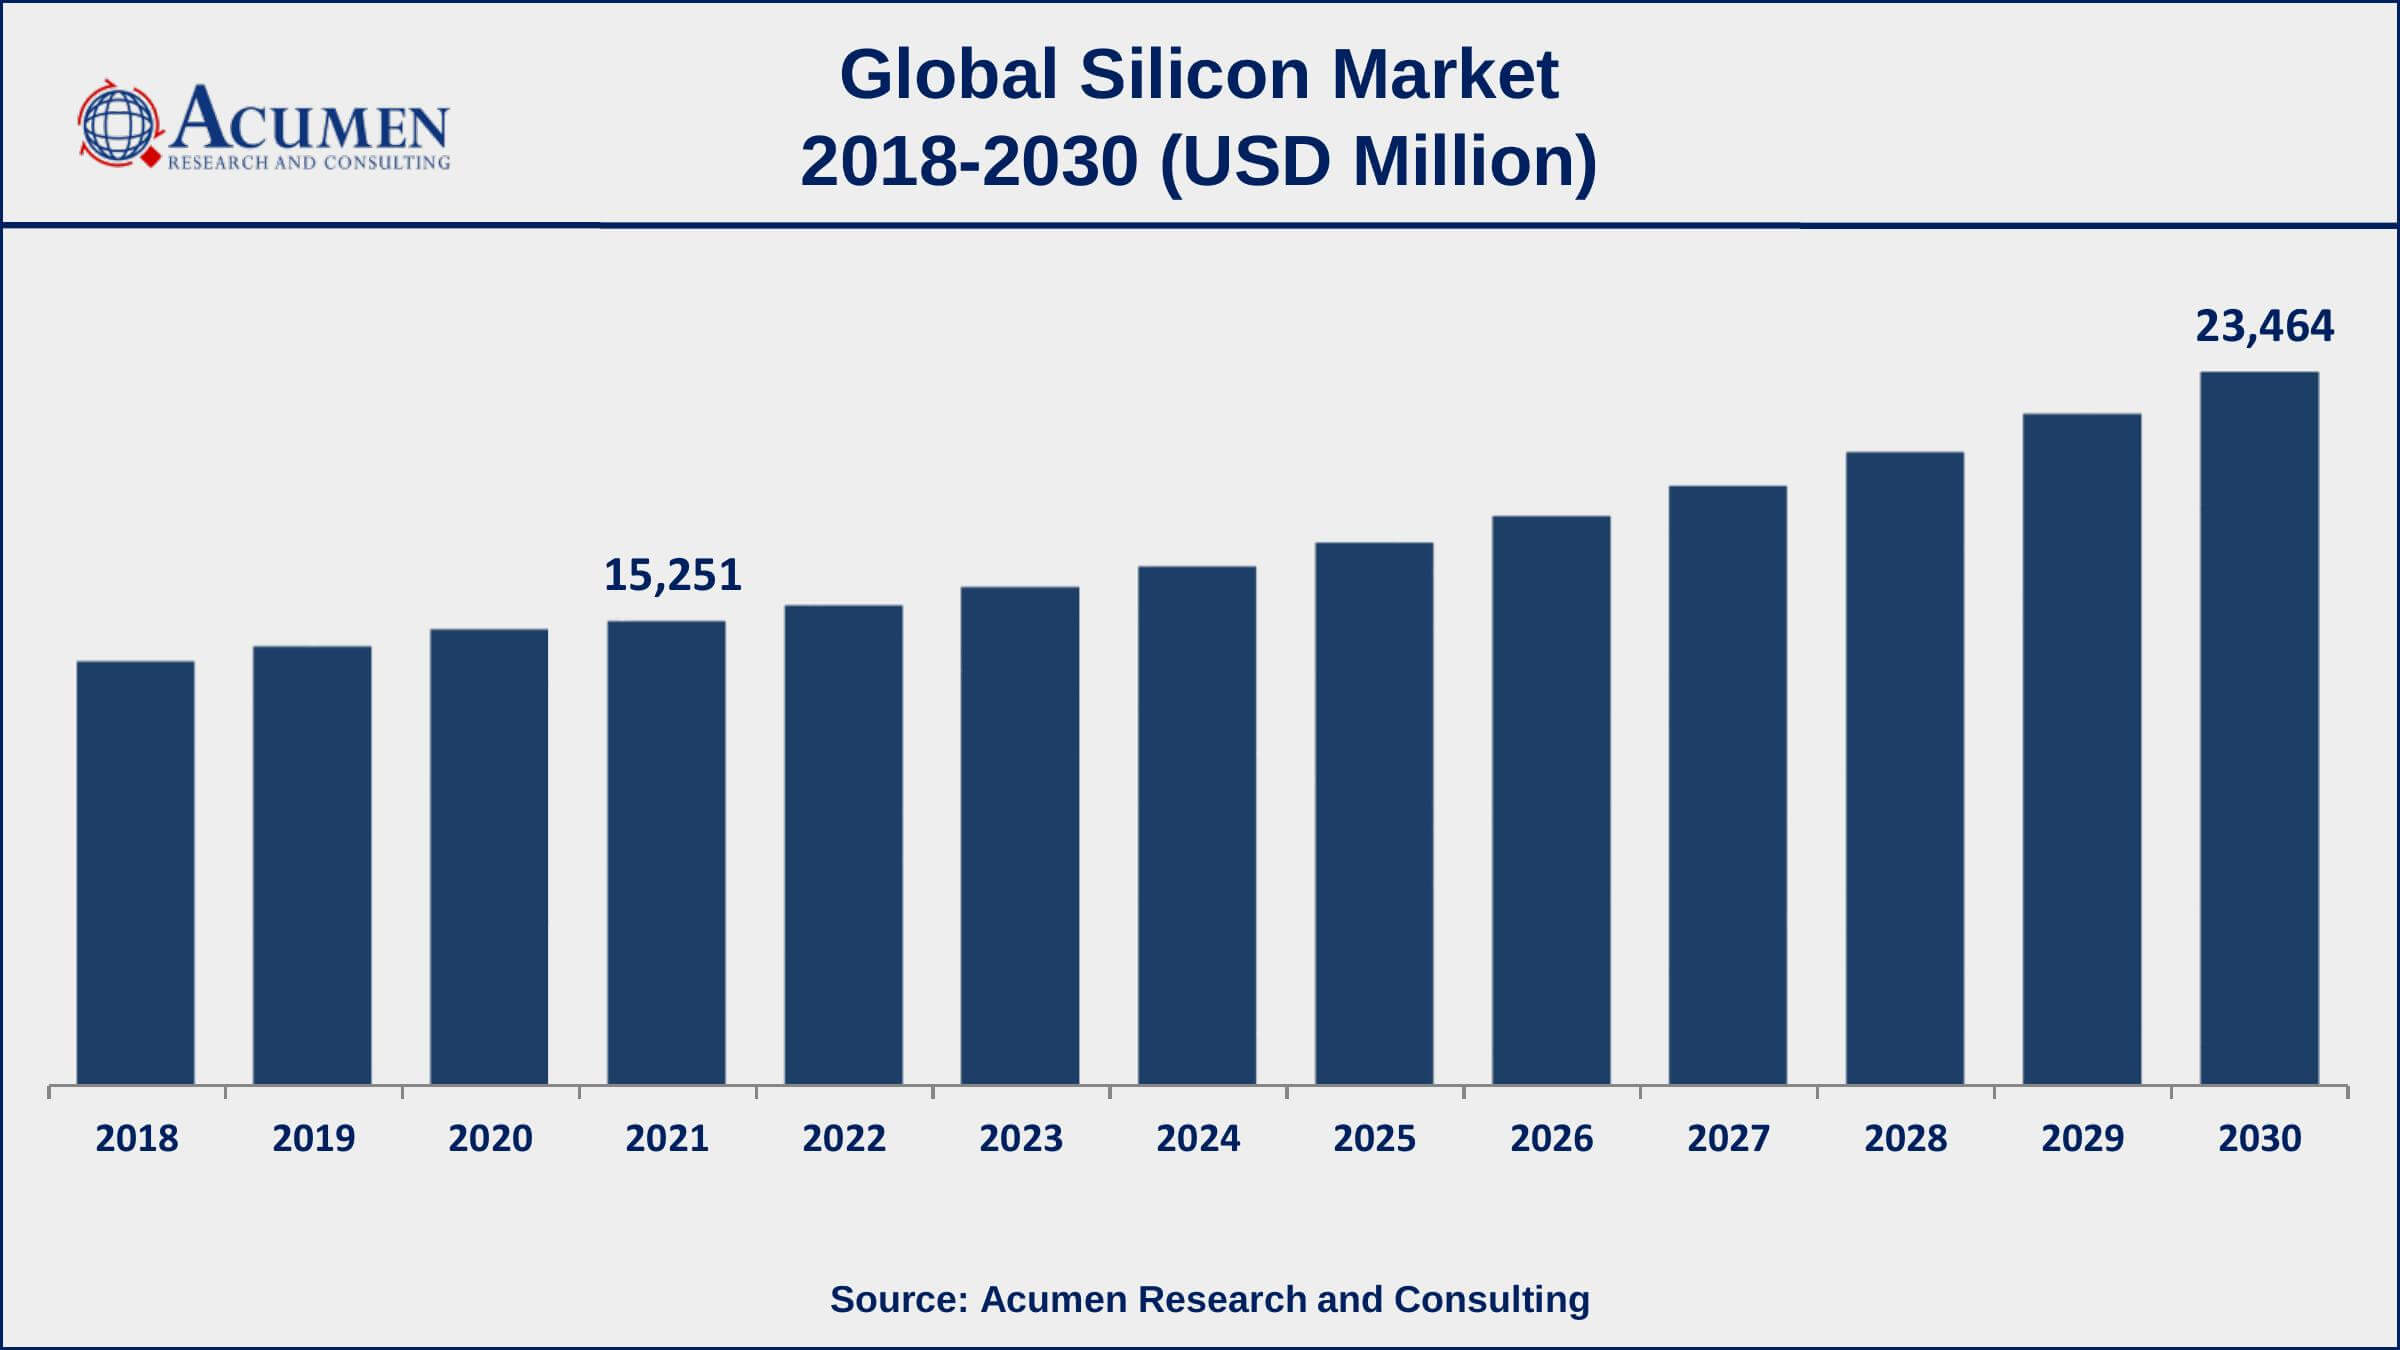 Asia-Pacific silicon market share accounted for over 43.8% of total market shares in 2021